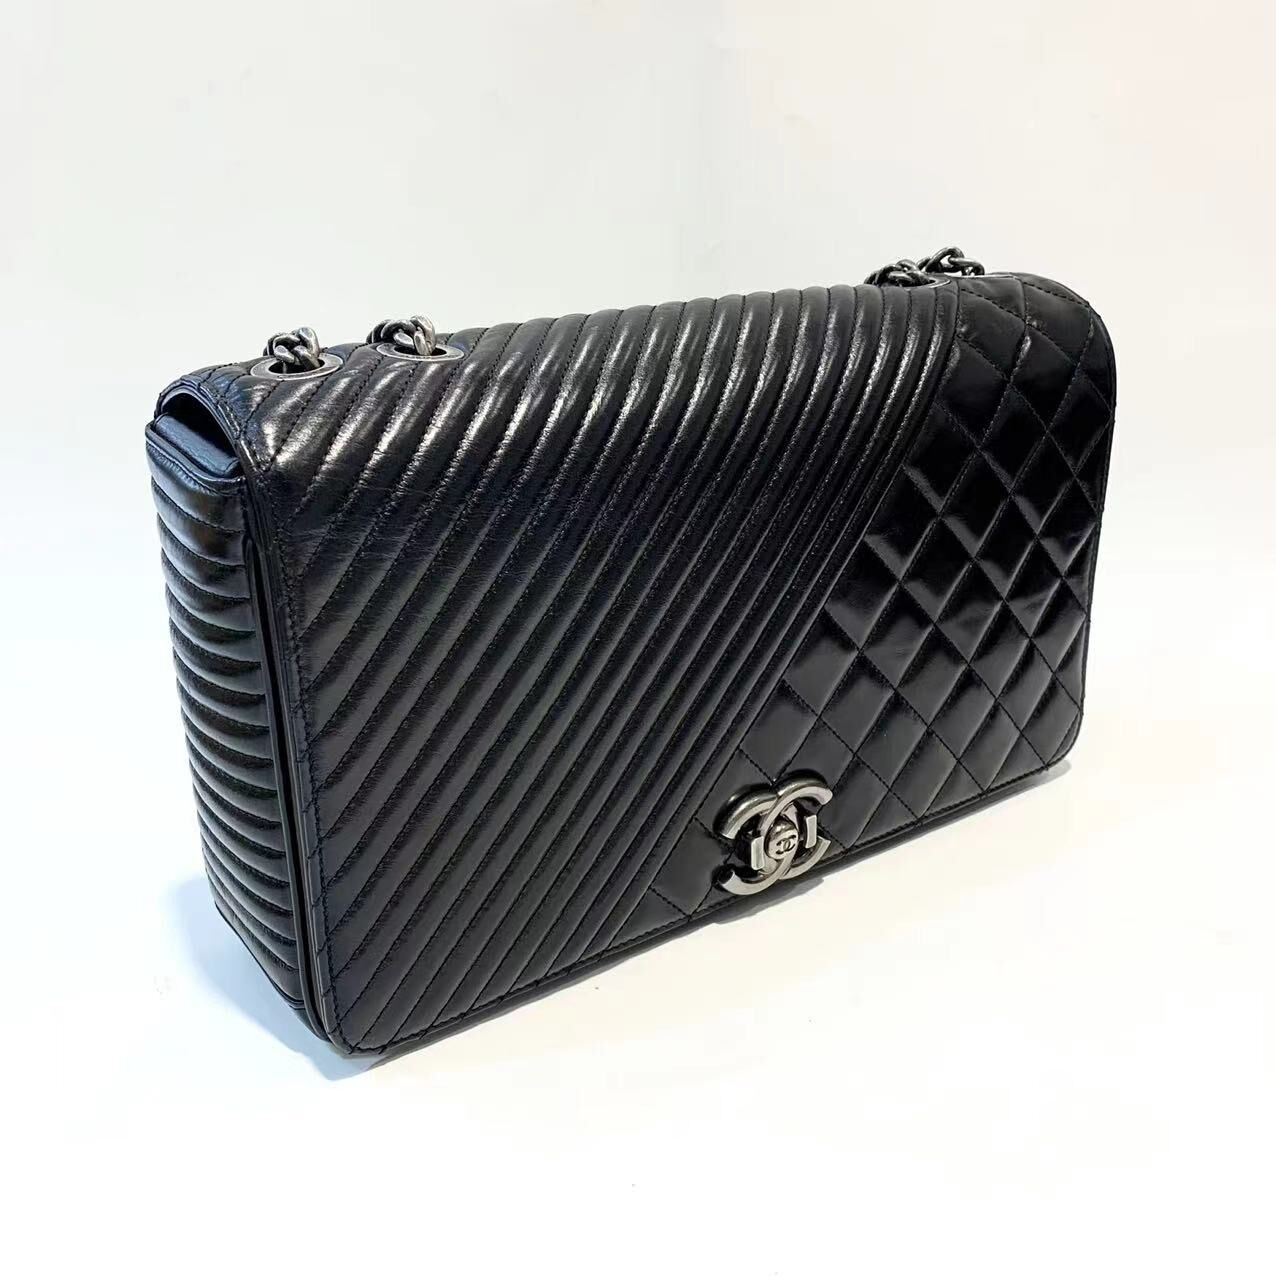 Chanel 1112 Classic 2.55 Black REAL Leather With Silver Hardware